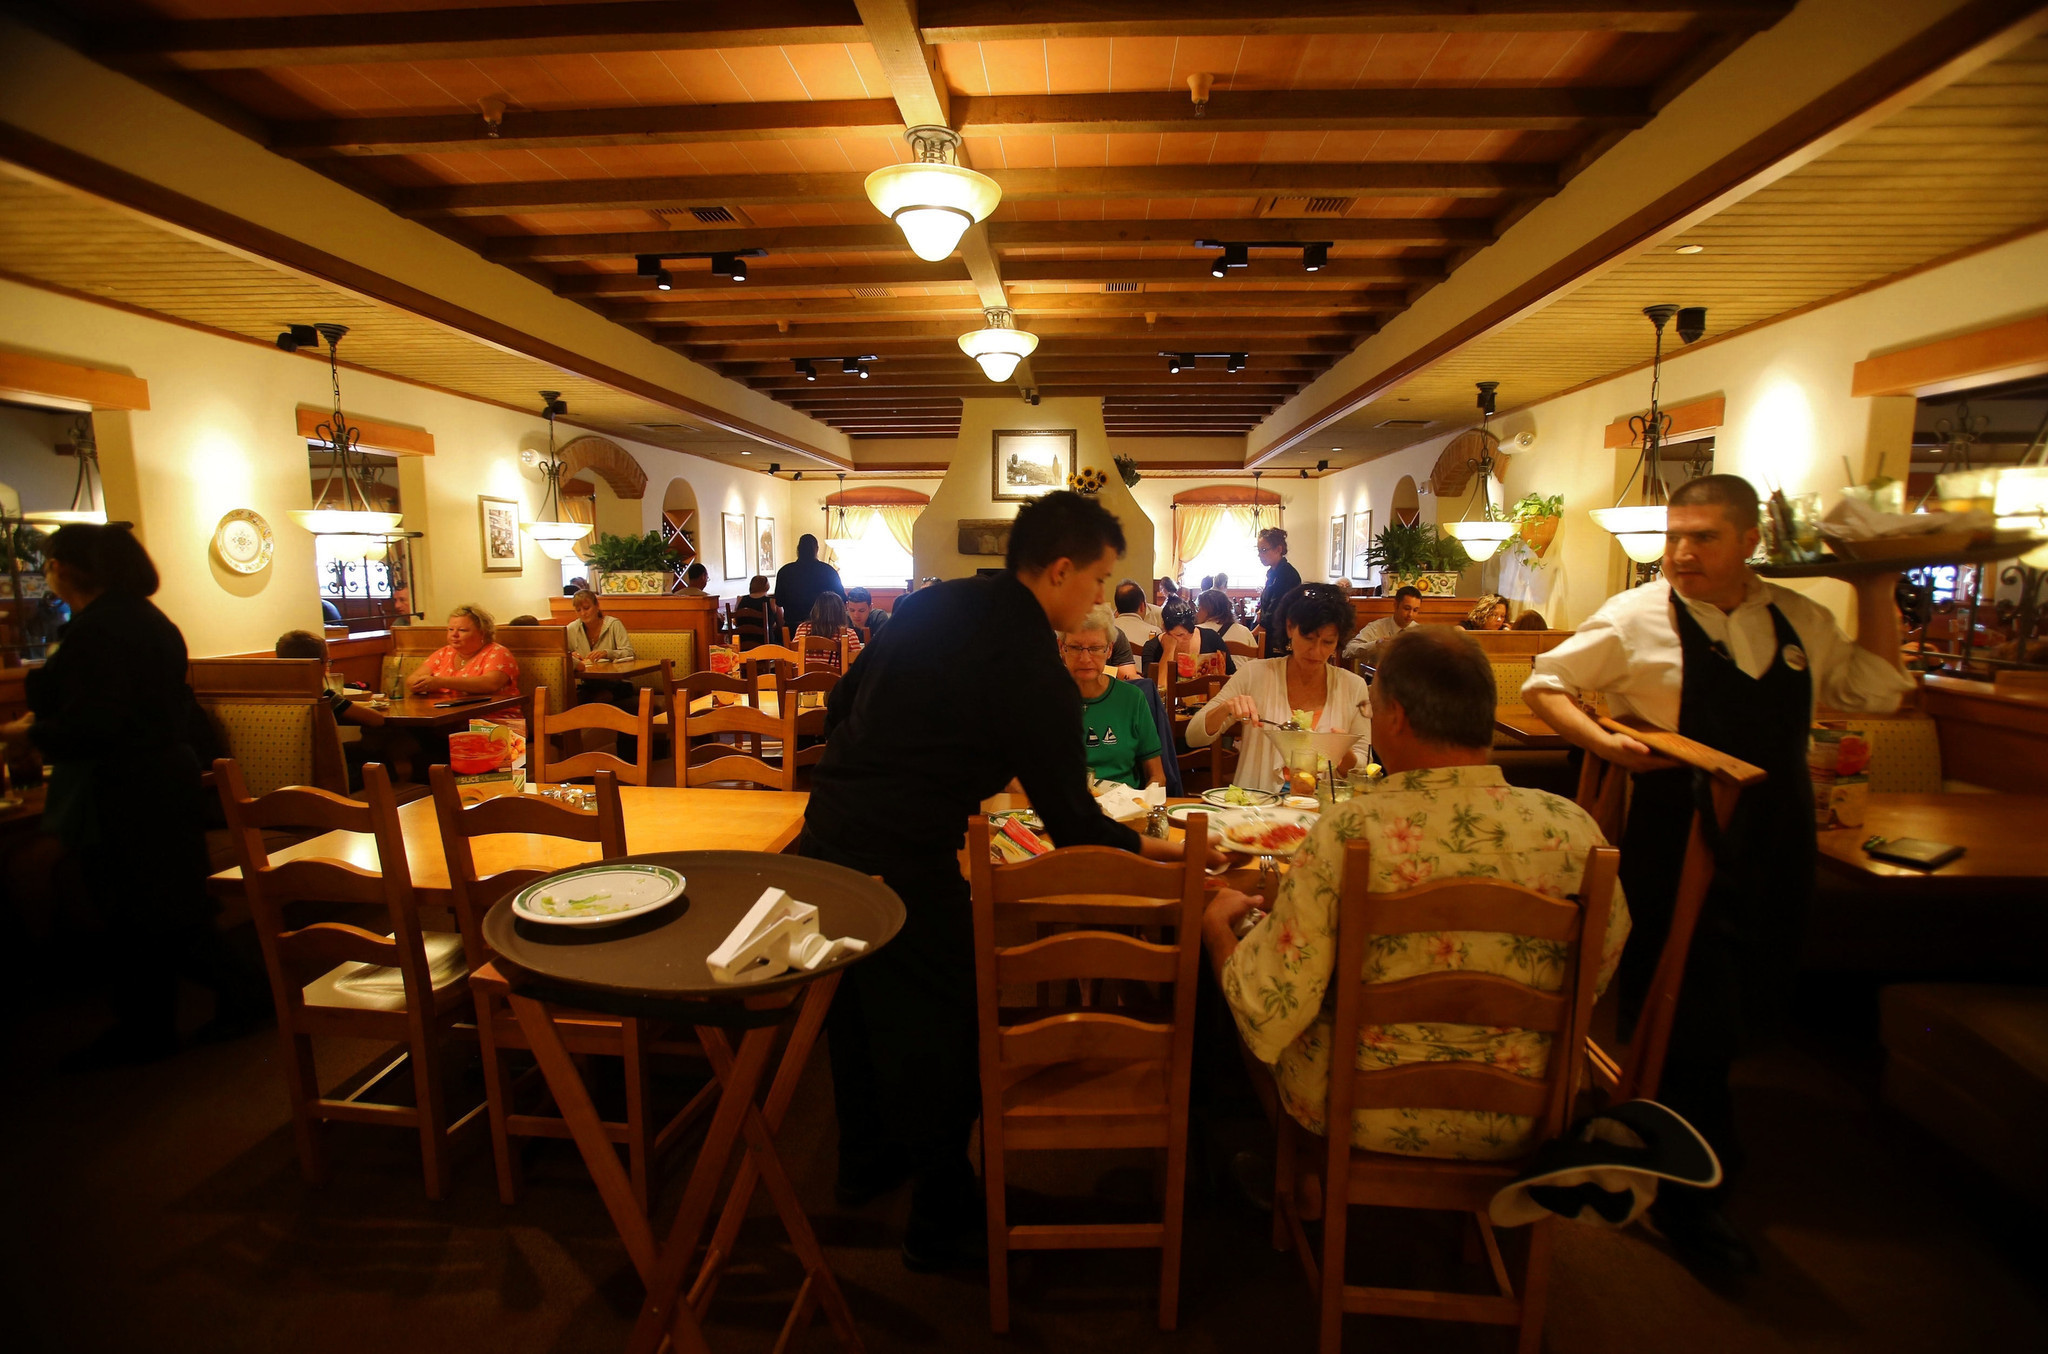 Olive Garden's latest cost-cutting plan: Clean carpet less often